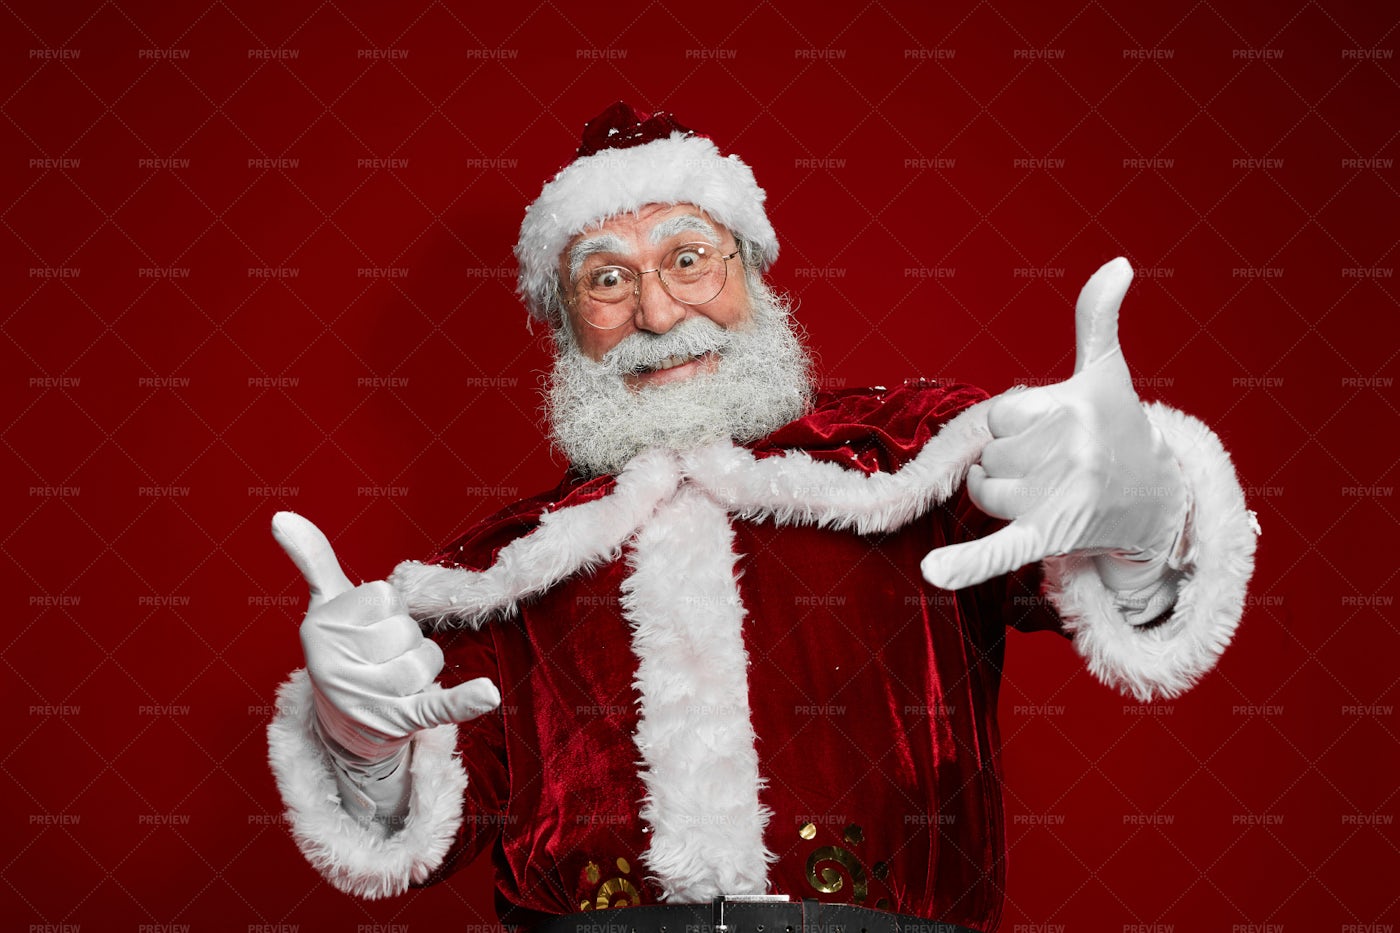 Santa Claus Showing Dancing On Red: Stock Photos